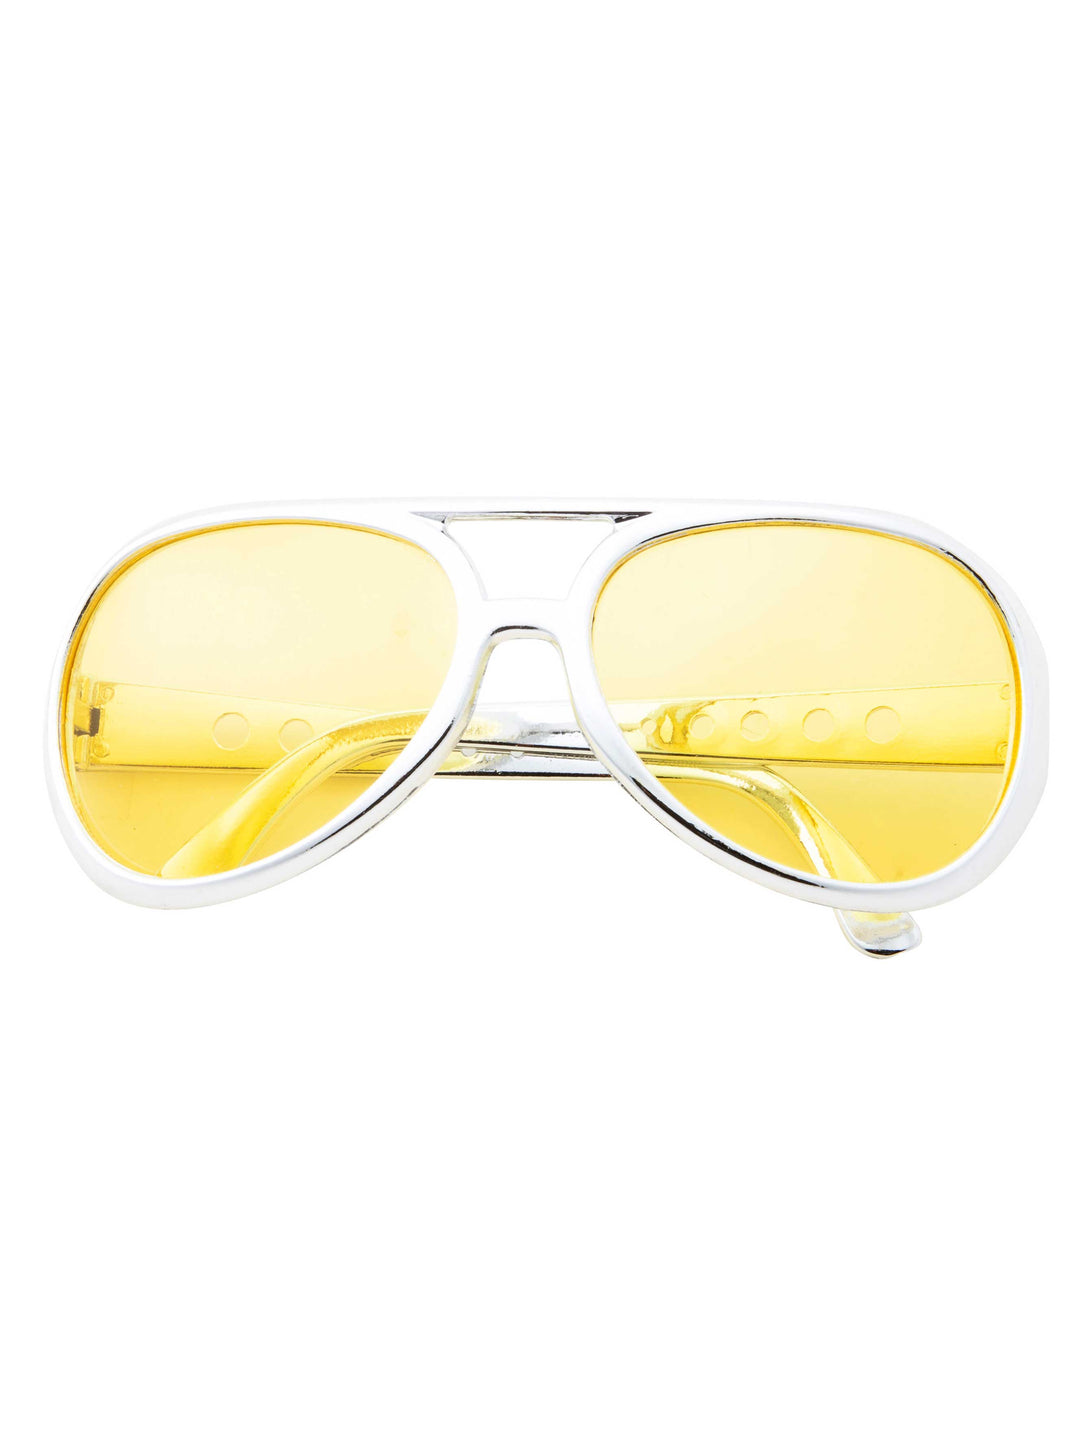 Large Retro King Of Rock And Roll Elvis Aviator Sunglasses - grinderPUNCH